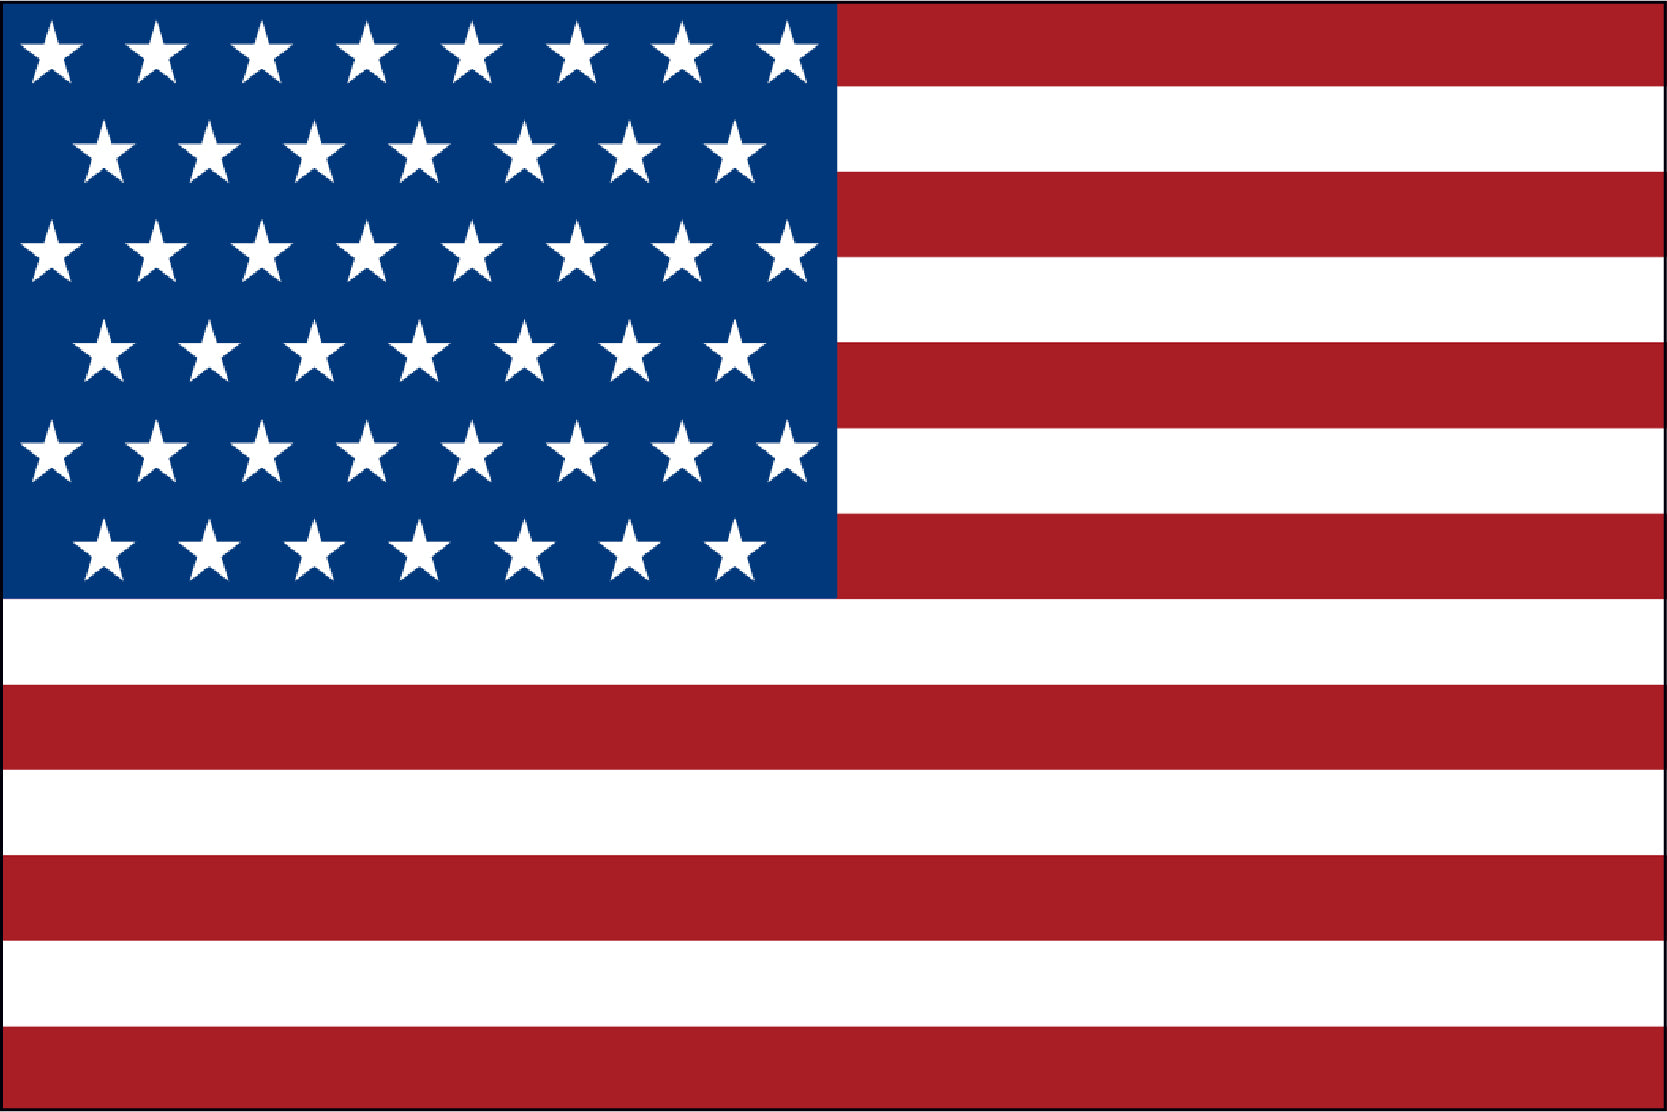 45 Star Old Glory Flag - LEAD TIMES ARE CURRENTLY RUNNING 6-8 WEEKS